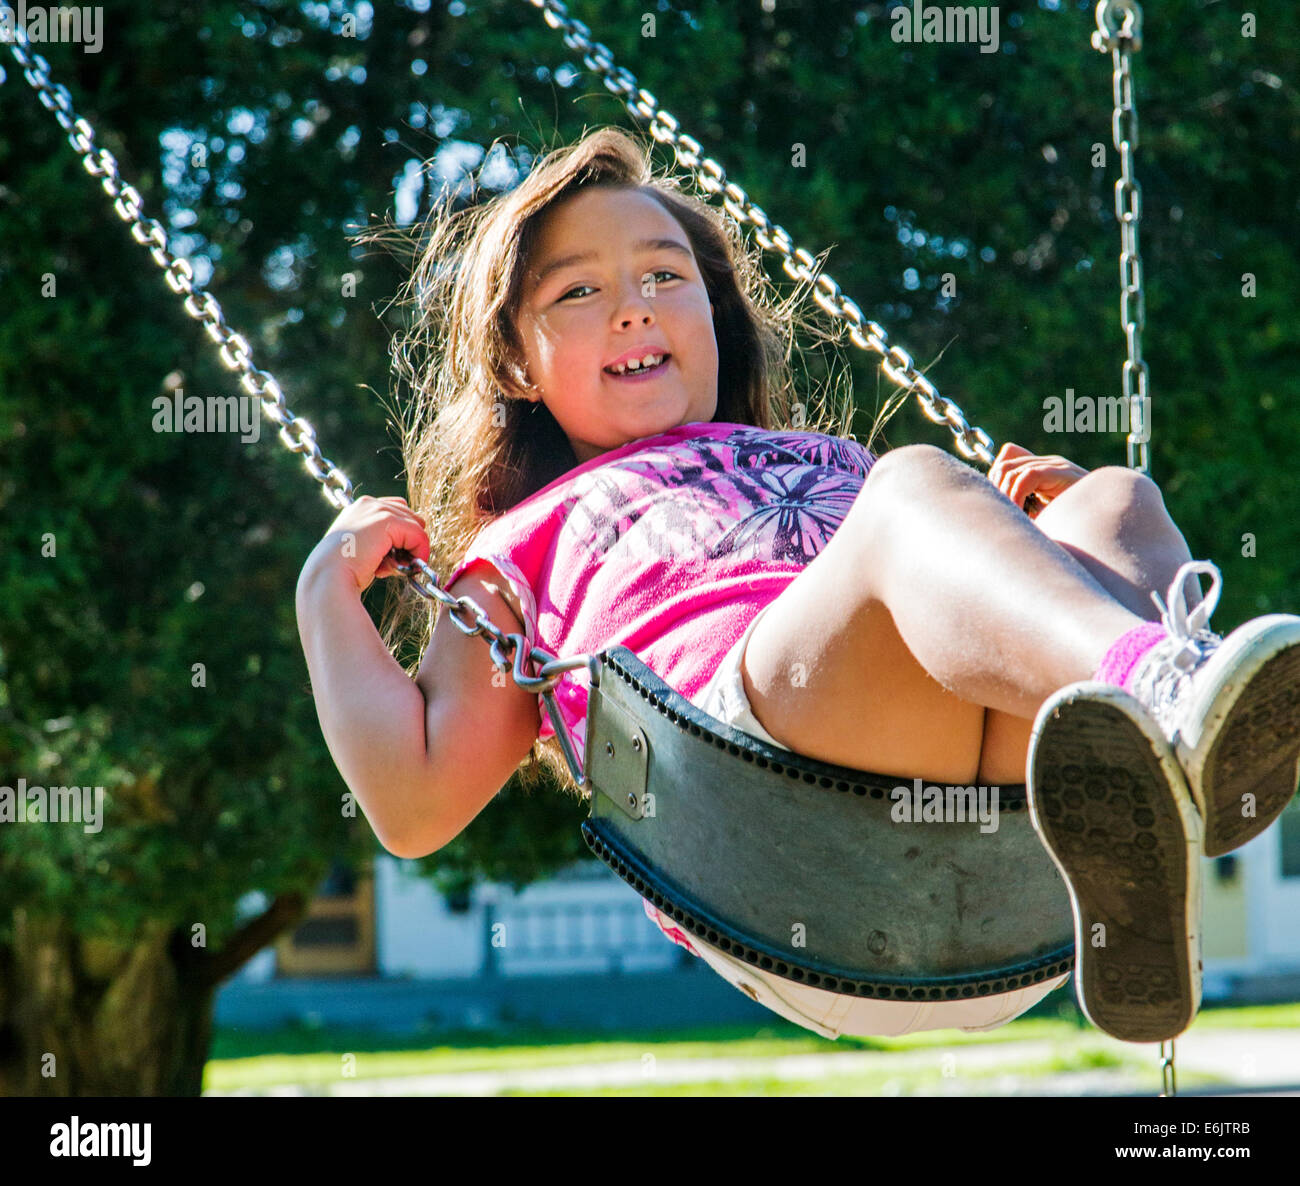 Summer photograph of seven year old girl on a playground swing Stock Photo